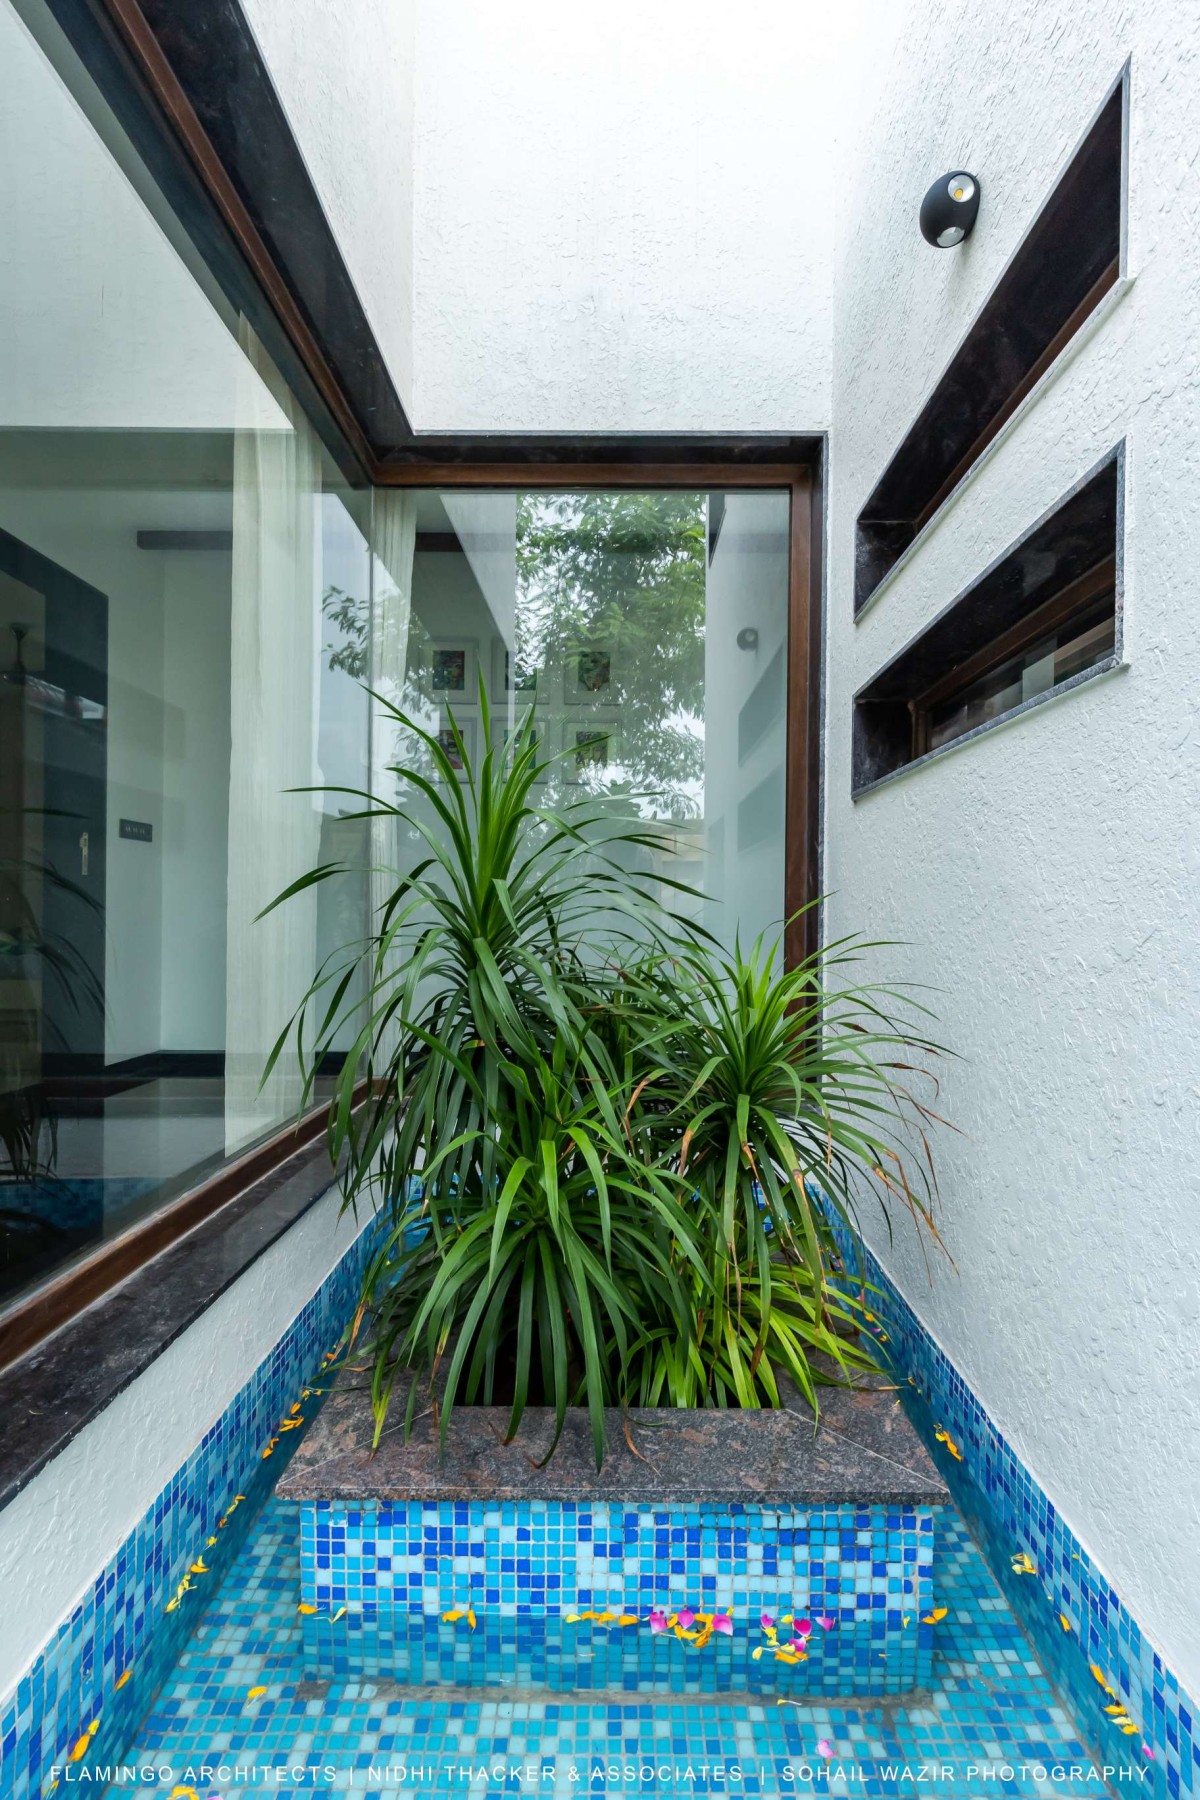 Water Body of Pujara House by Flamingo Architects + Nidhi Thacker and Associates